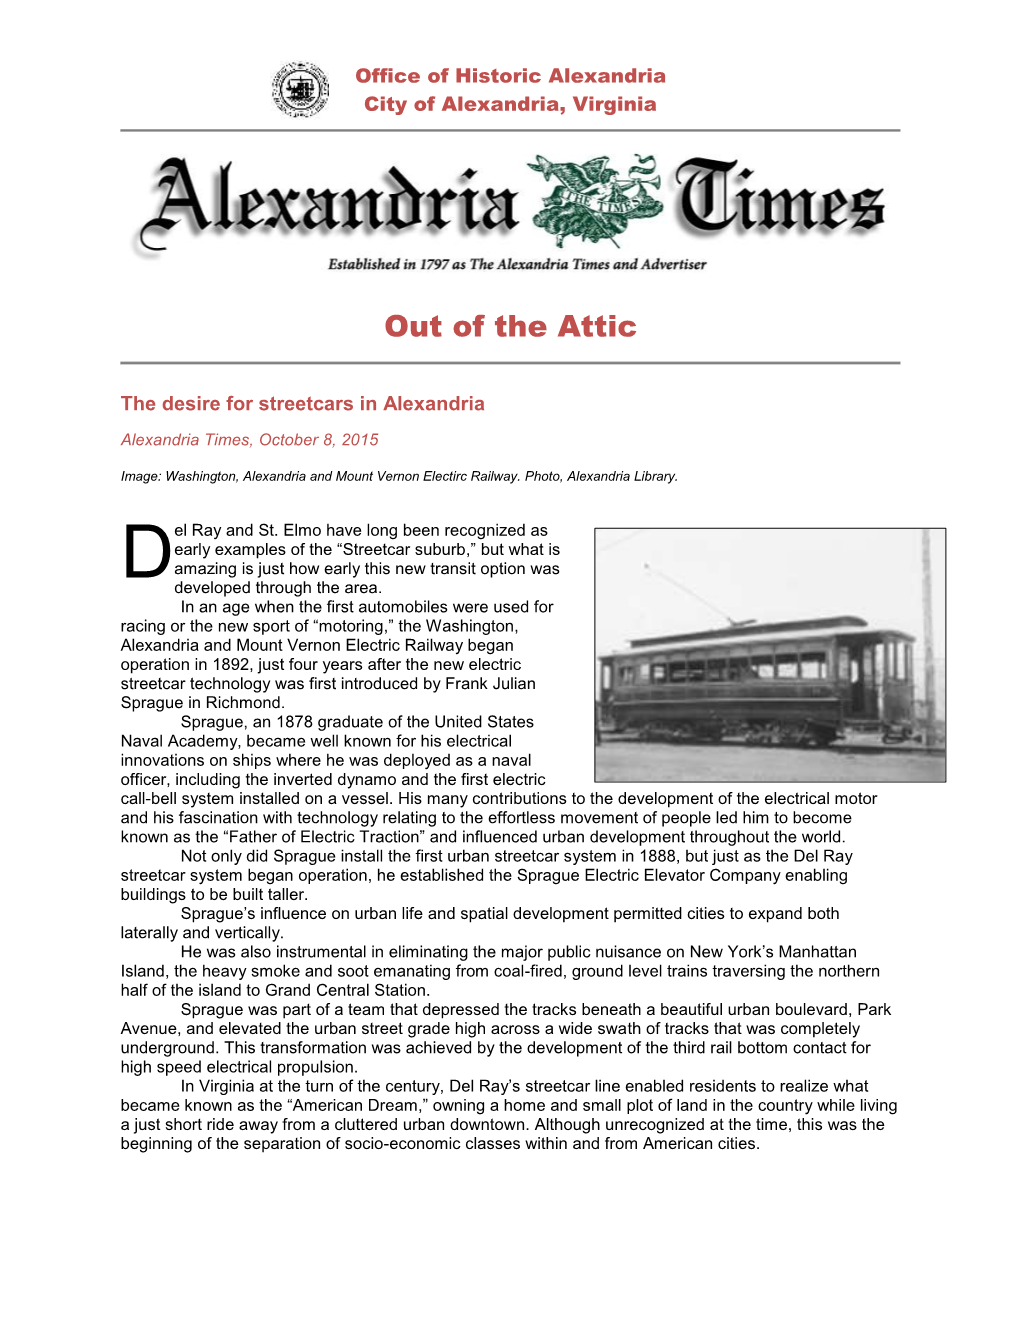 The Desire for Streetcars in Alexandria